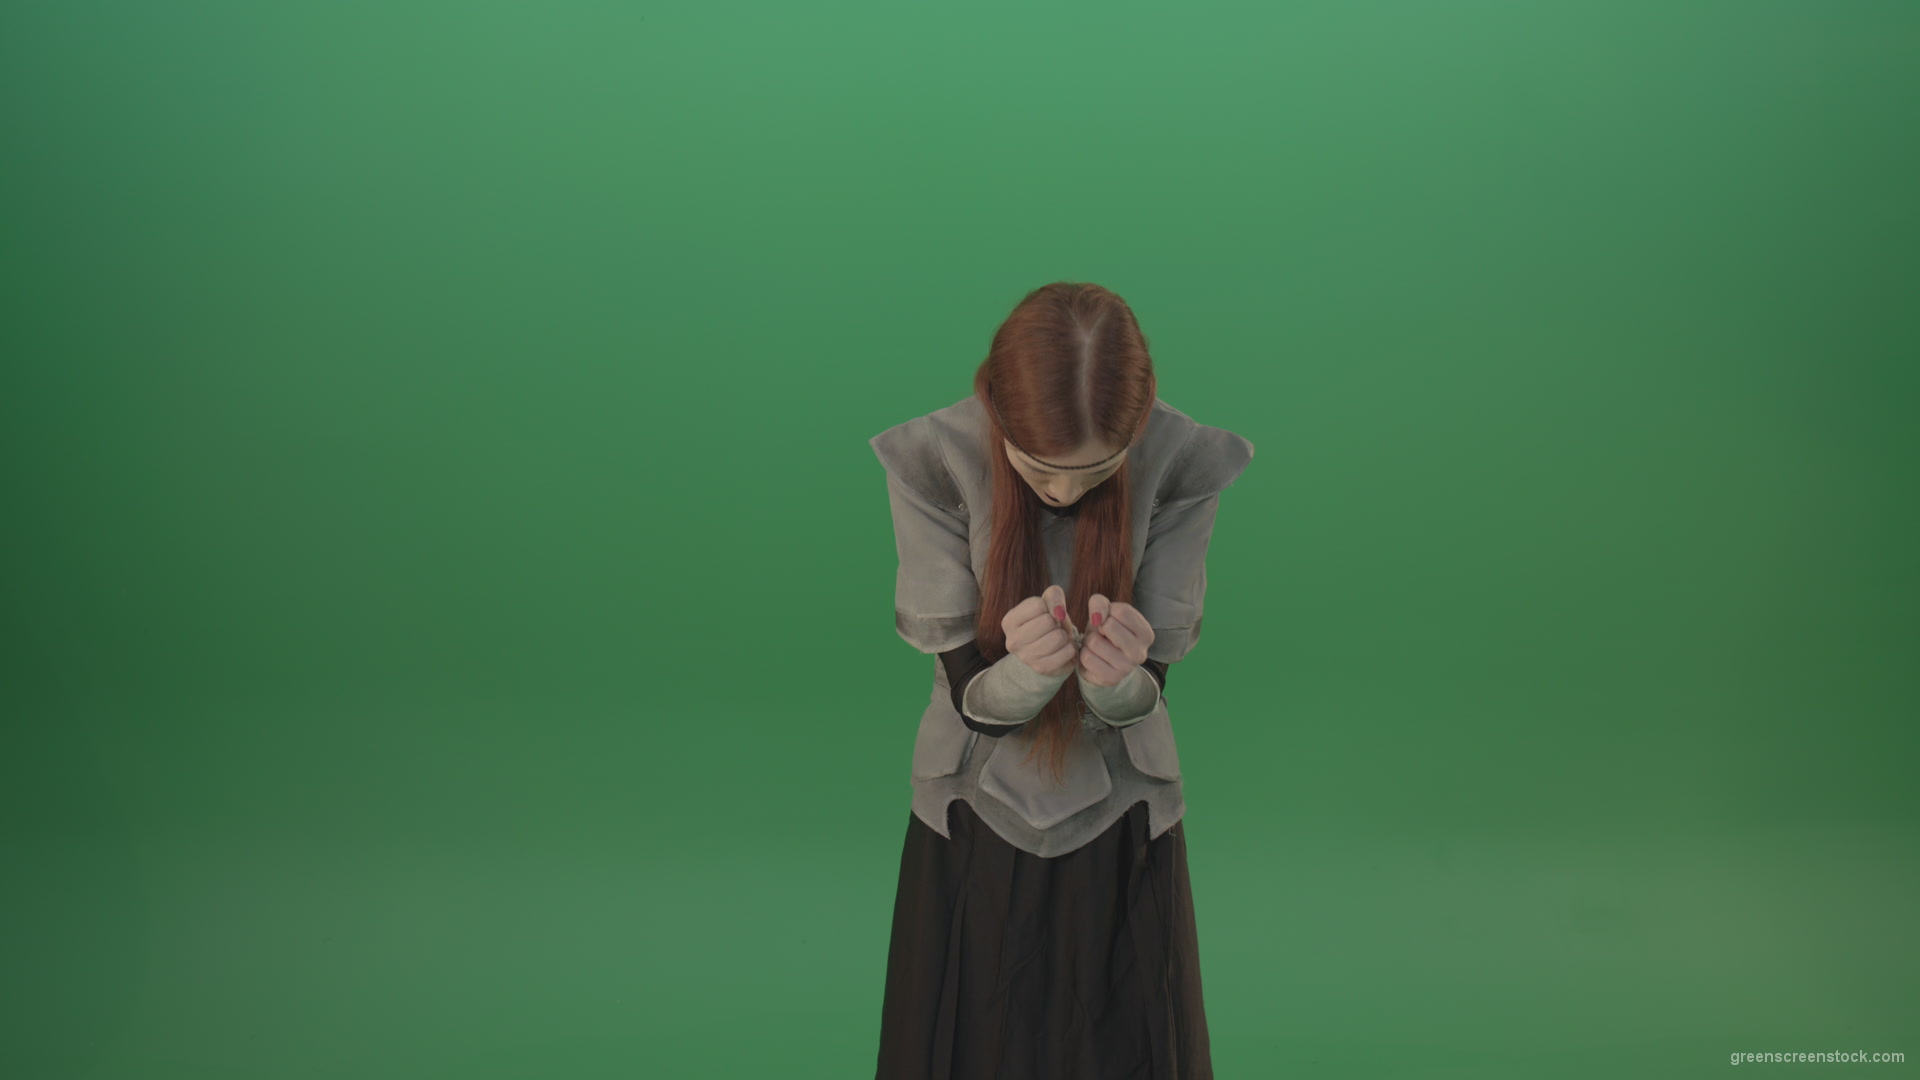 Cried-warrior-girl-releases-all-her-energy-cosplay-on-a-green-background_004 Green Screen Stock